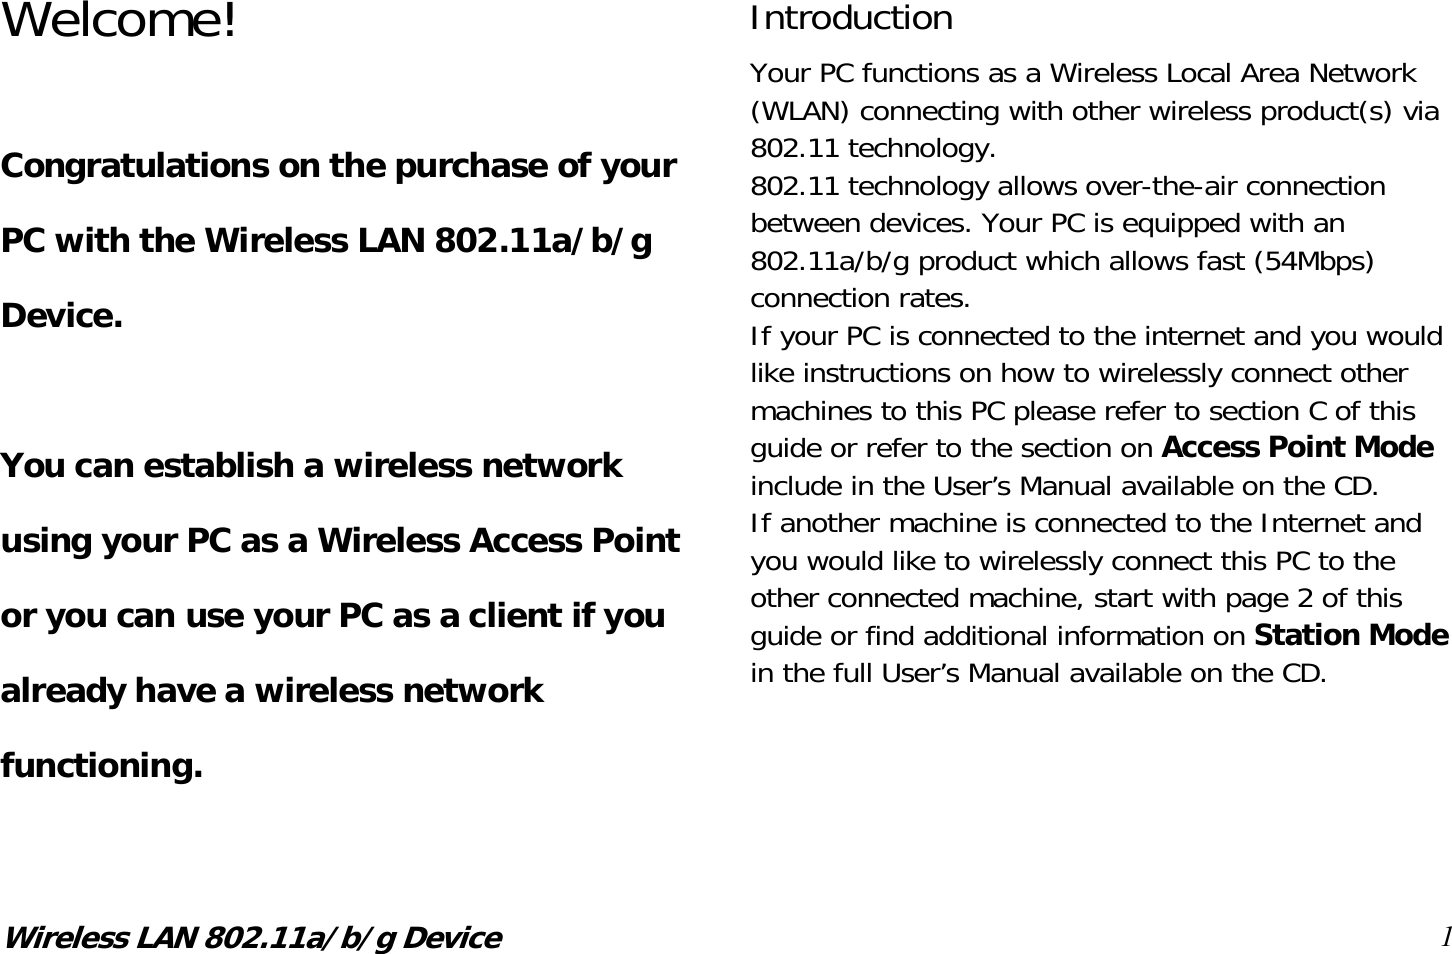 Wireless LAN 802.11a/b/g Device 1 Welcome!  Congratulations on the purchase of your PC with the Wireless LAN 802.11a/b/g Device.  You can establish a wireless network using your PC as a Wireless Access Point or you can use your PC as a client if you already have a wireless network functioning. Introduction Your PC functions as a Wireless Local Area Network (WLAN) connecting with other wireless product(s) via 802.11 technology. 802.11 technology allows over-the-air connection between devices. Your PC is equipped with an 802.11a/b/g product which allows fast (54Mbps) connection rates. If your PC is connected to the internet and you would like instructions on how to wirelessly connect other machines to this PC please refer to section C of this guide or refer to the section on Access Point Mode include in the User’s Manual available on the CD. If another machine is connected to the Internet and you would like to wirelessly connect this PC to the other connected machine, start with page 2 of this guide or find additional information on Station Mode in the full User’s Manual available on the CD.     